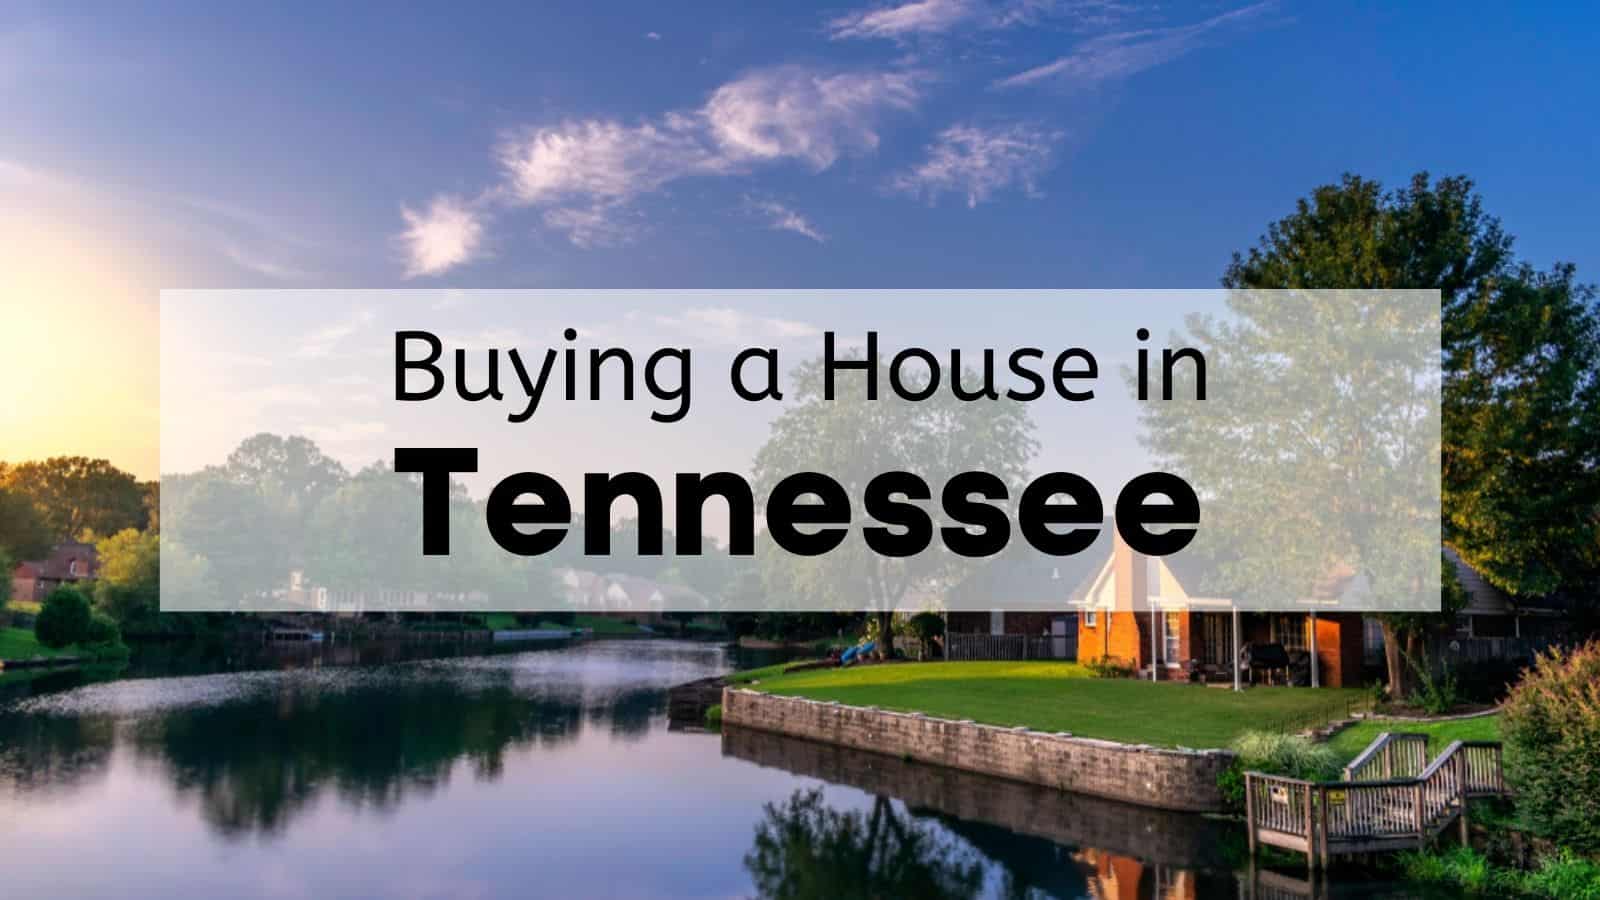 Buying a House in Tennessee